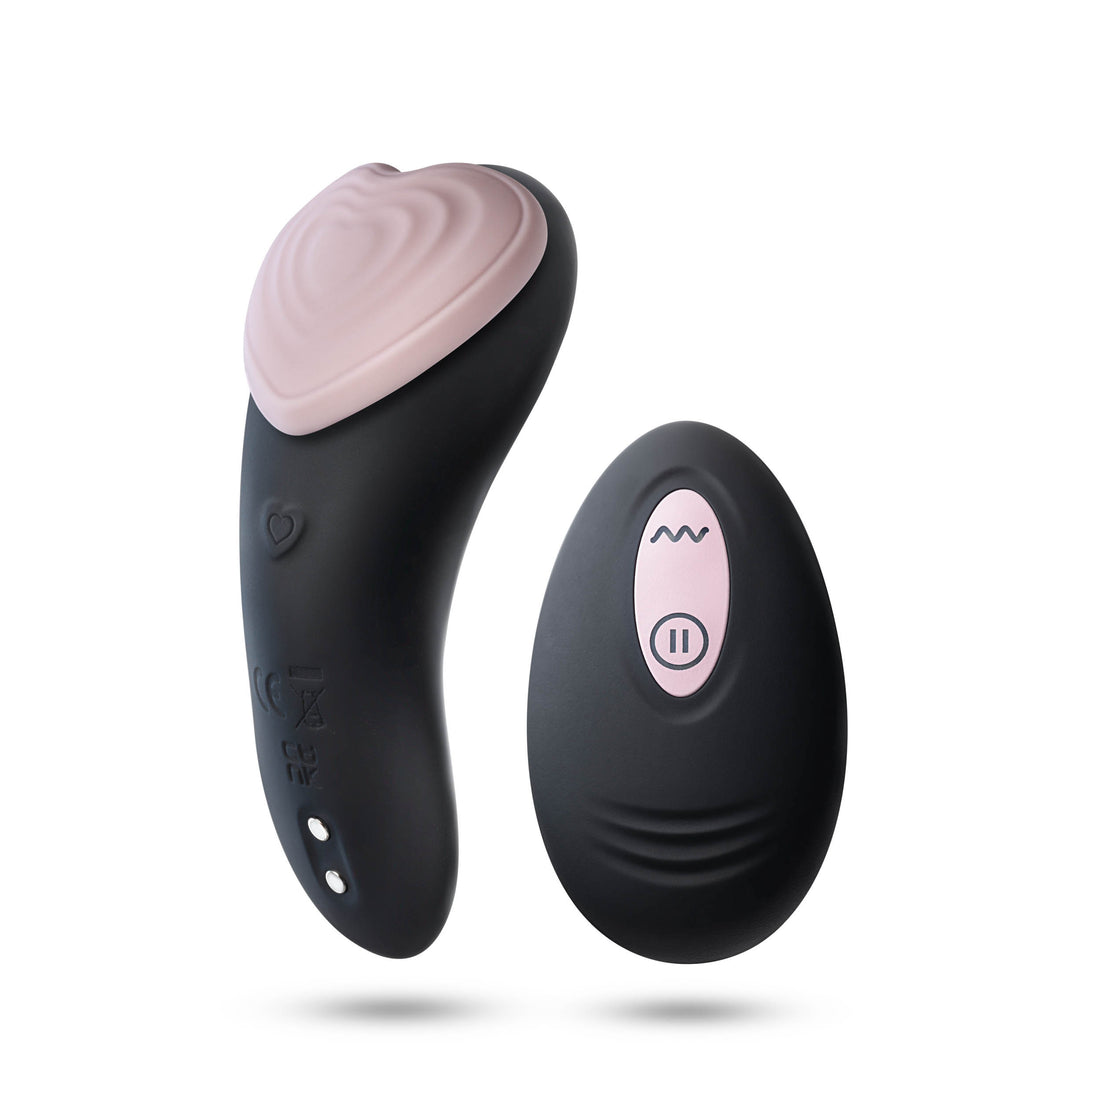 Temptasia - Heartbeat - Panty Vibe With Remote -  Pink BL-21821